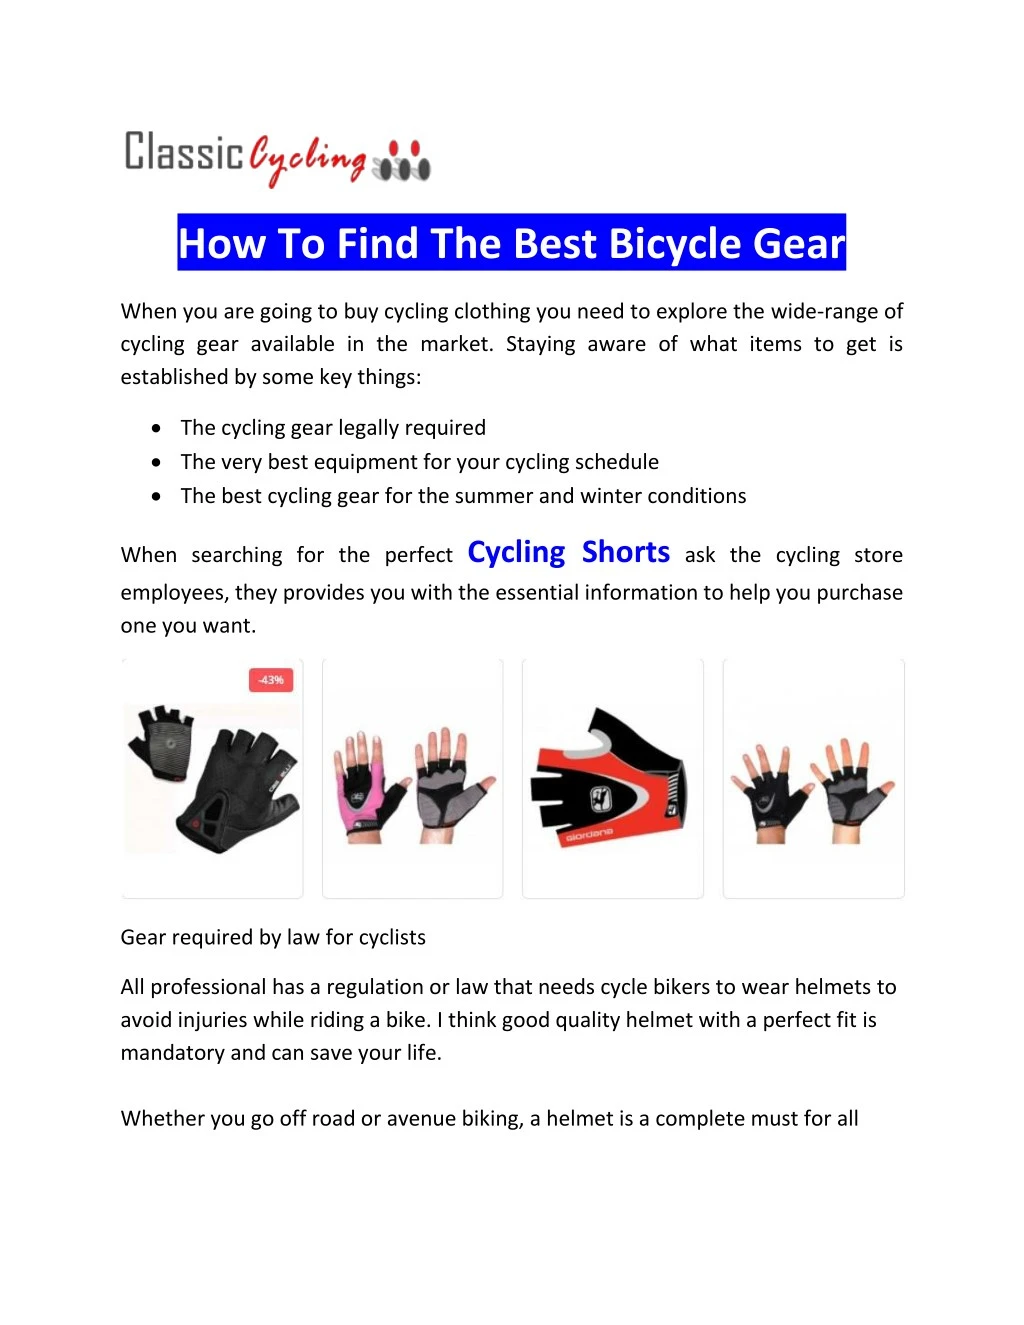 how to find the best bicycle gear